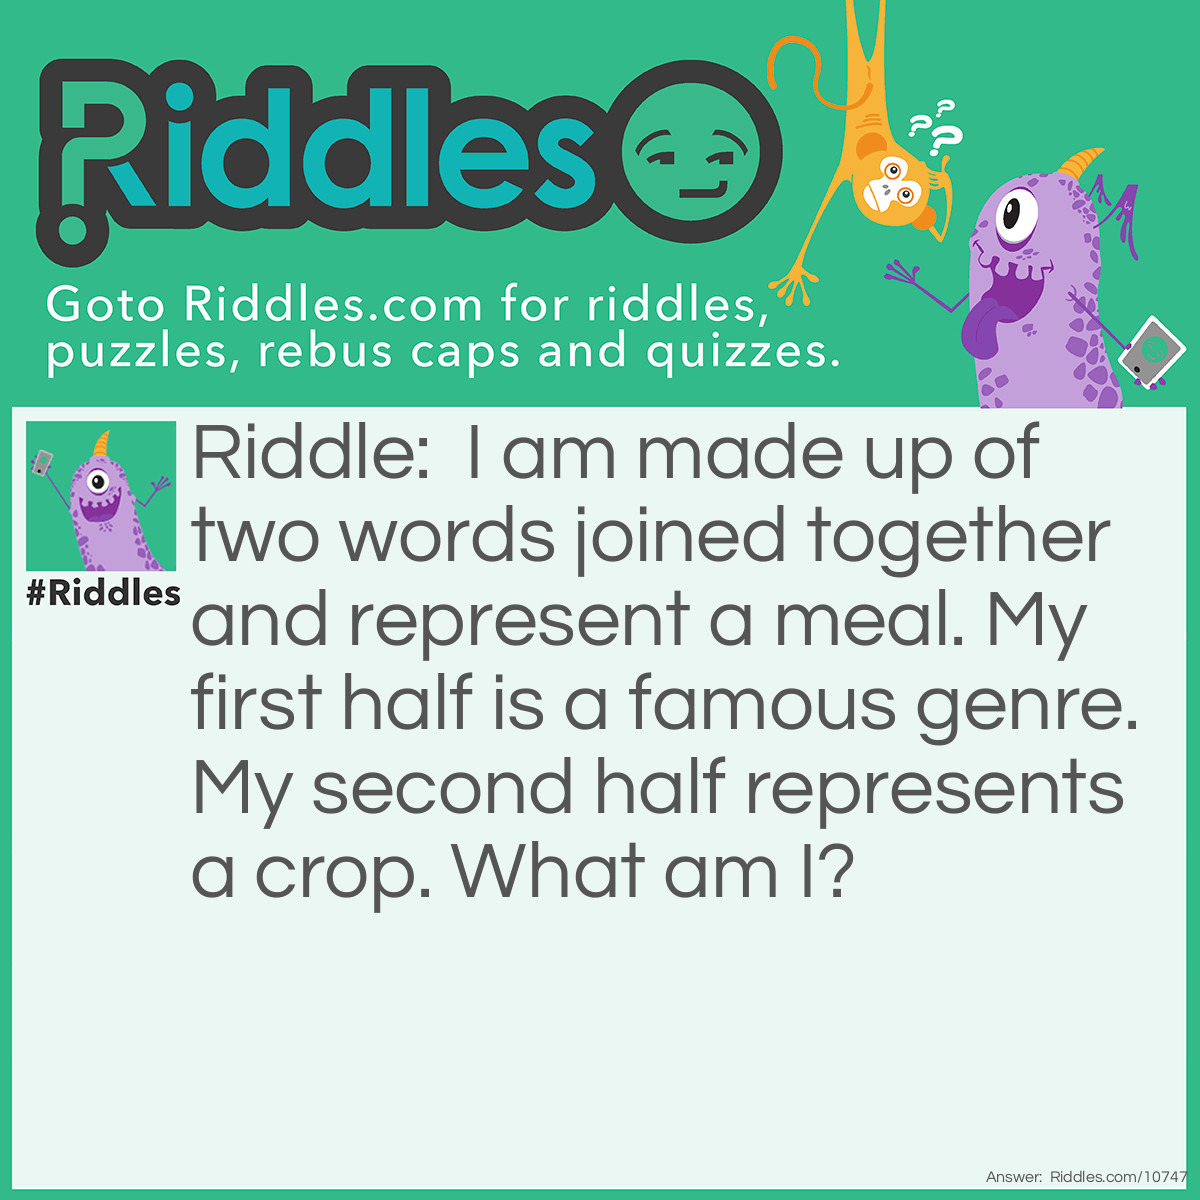 Riddle: I am made up of two words joined together and represent a meal. My first half is a famous genre. My second half represents a crop. What am I? Answer: Pop-Corn.